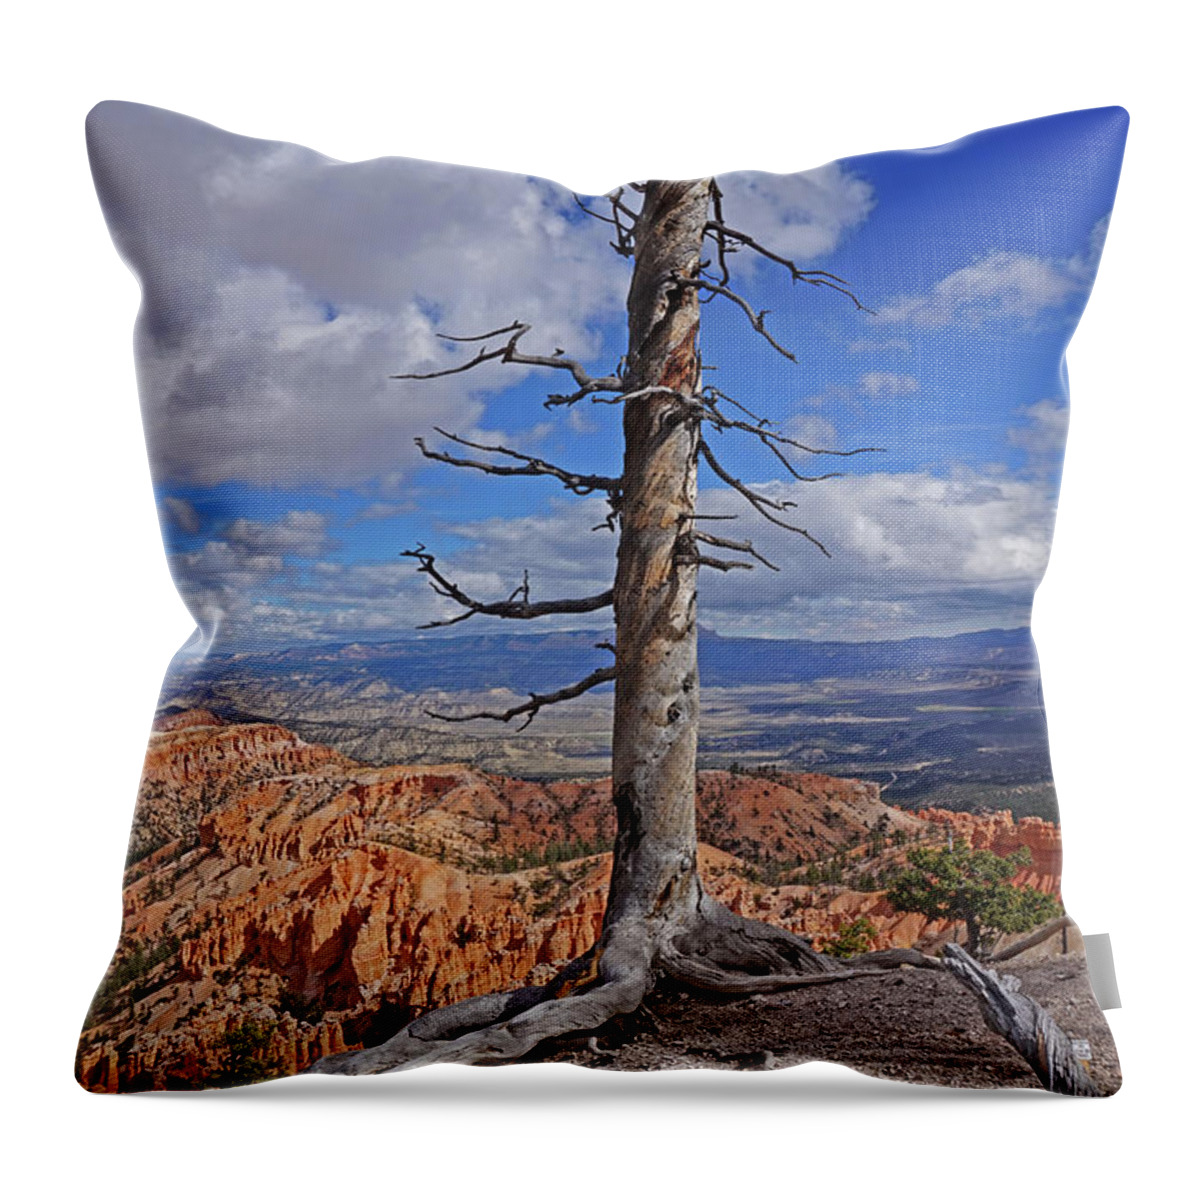 Bryce Canyon National Park Throw Pillow featuring the photograph Bryce Canyon National Park - Still standing by Yvonne Jasinski